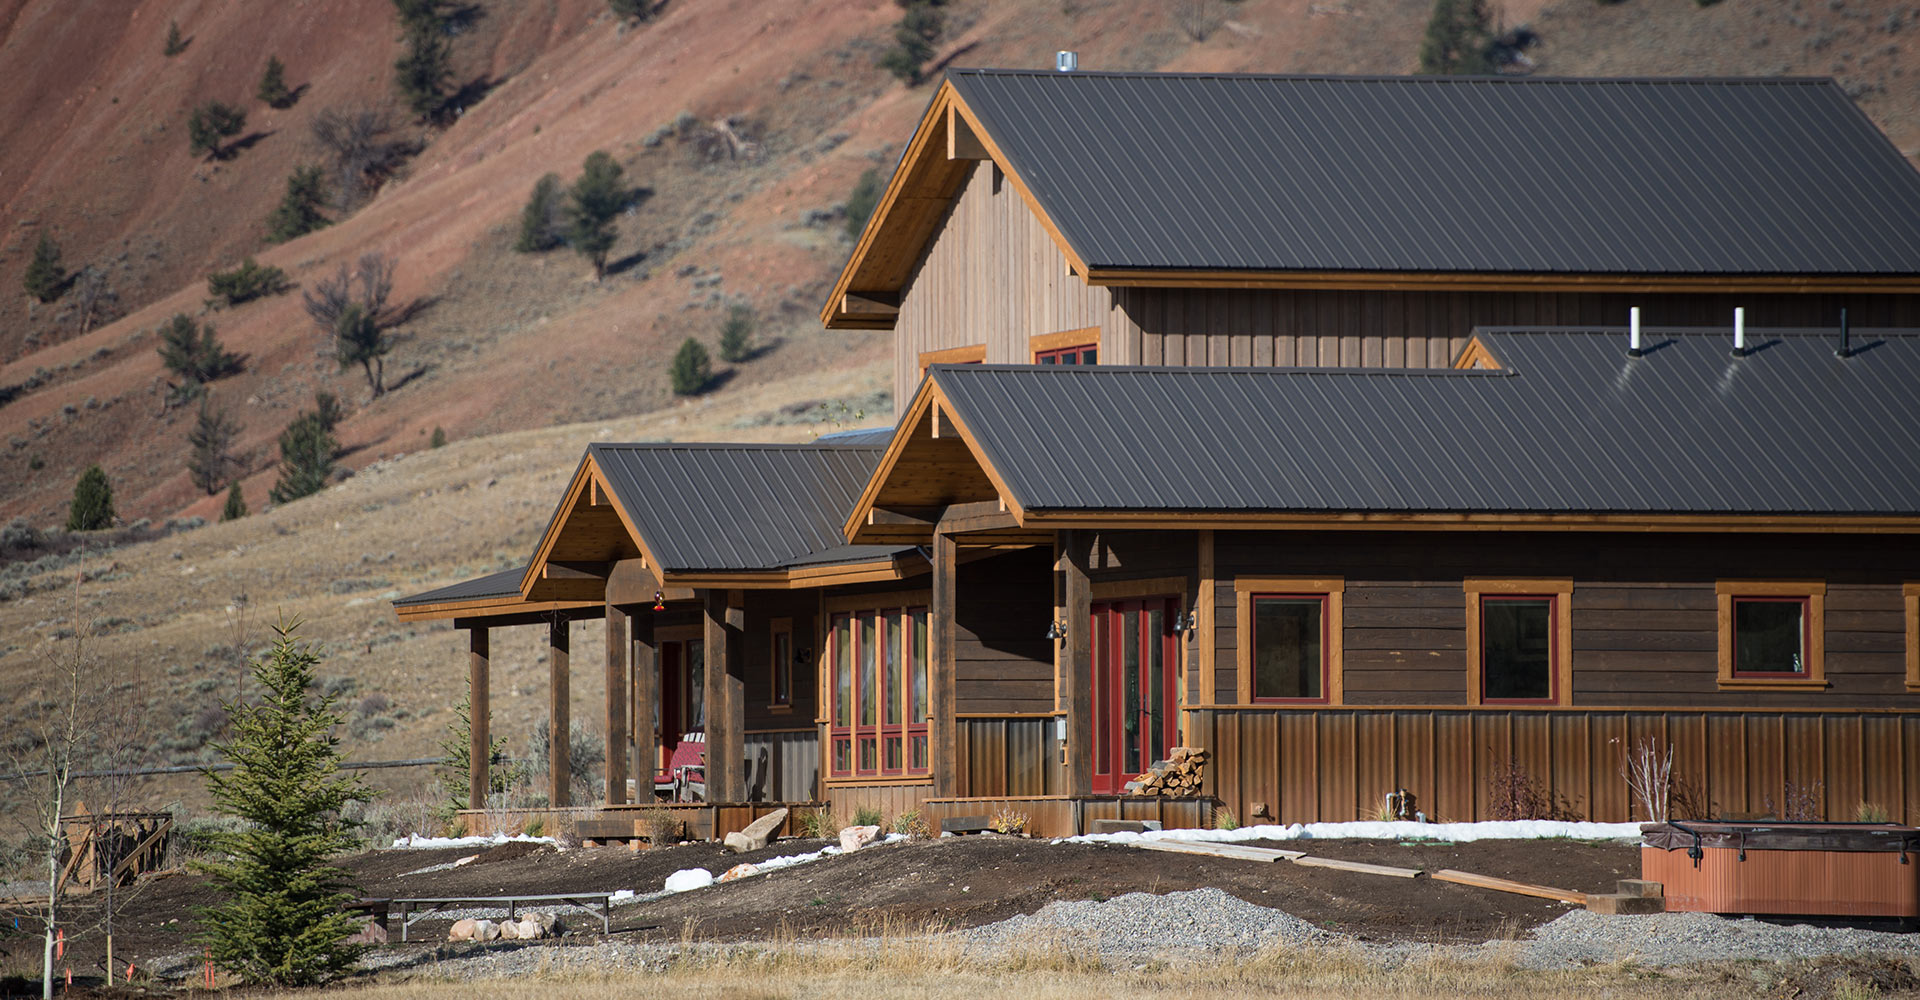 Architectural Services in Pinedale, WY